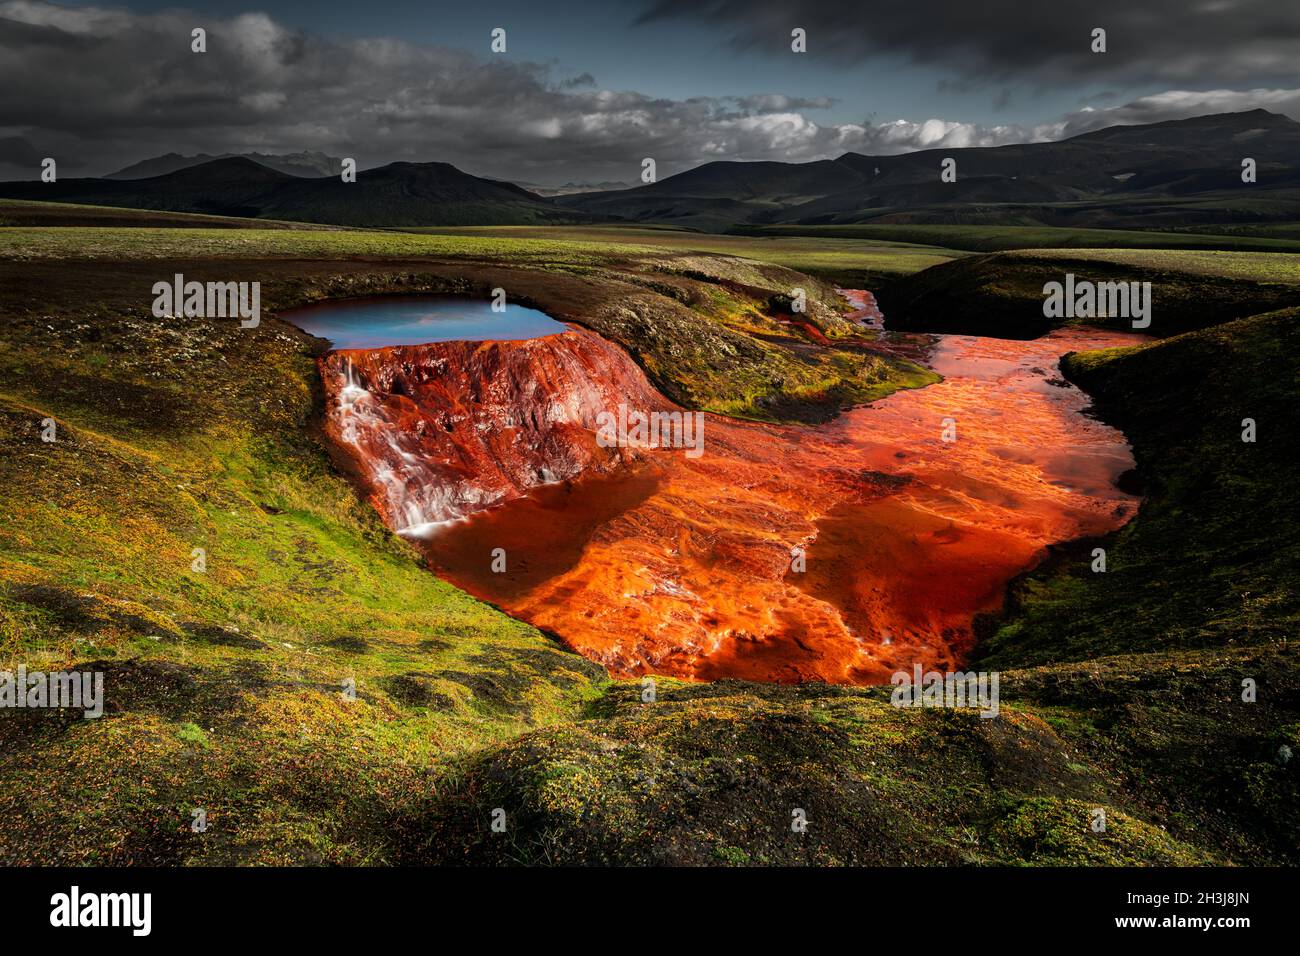 Natural wonder of Rauðauga (Red Eye) in Iceland's highlands. Stock Photo